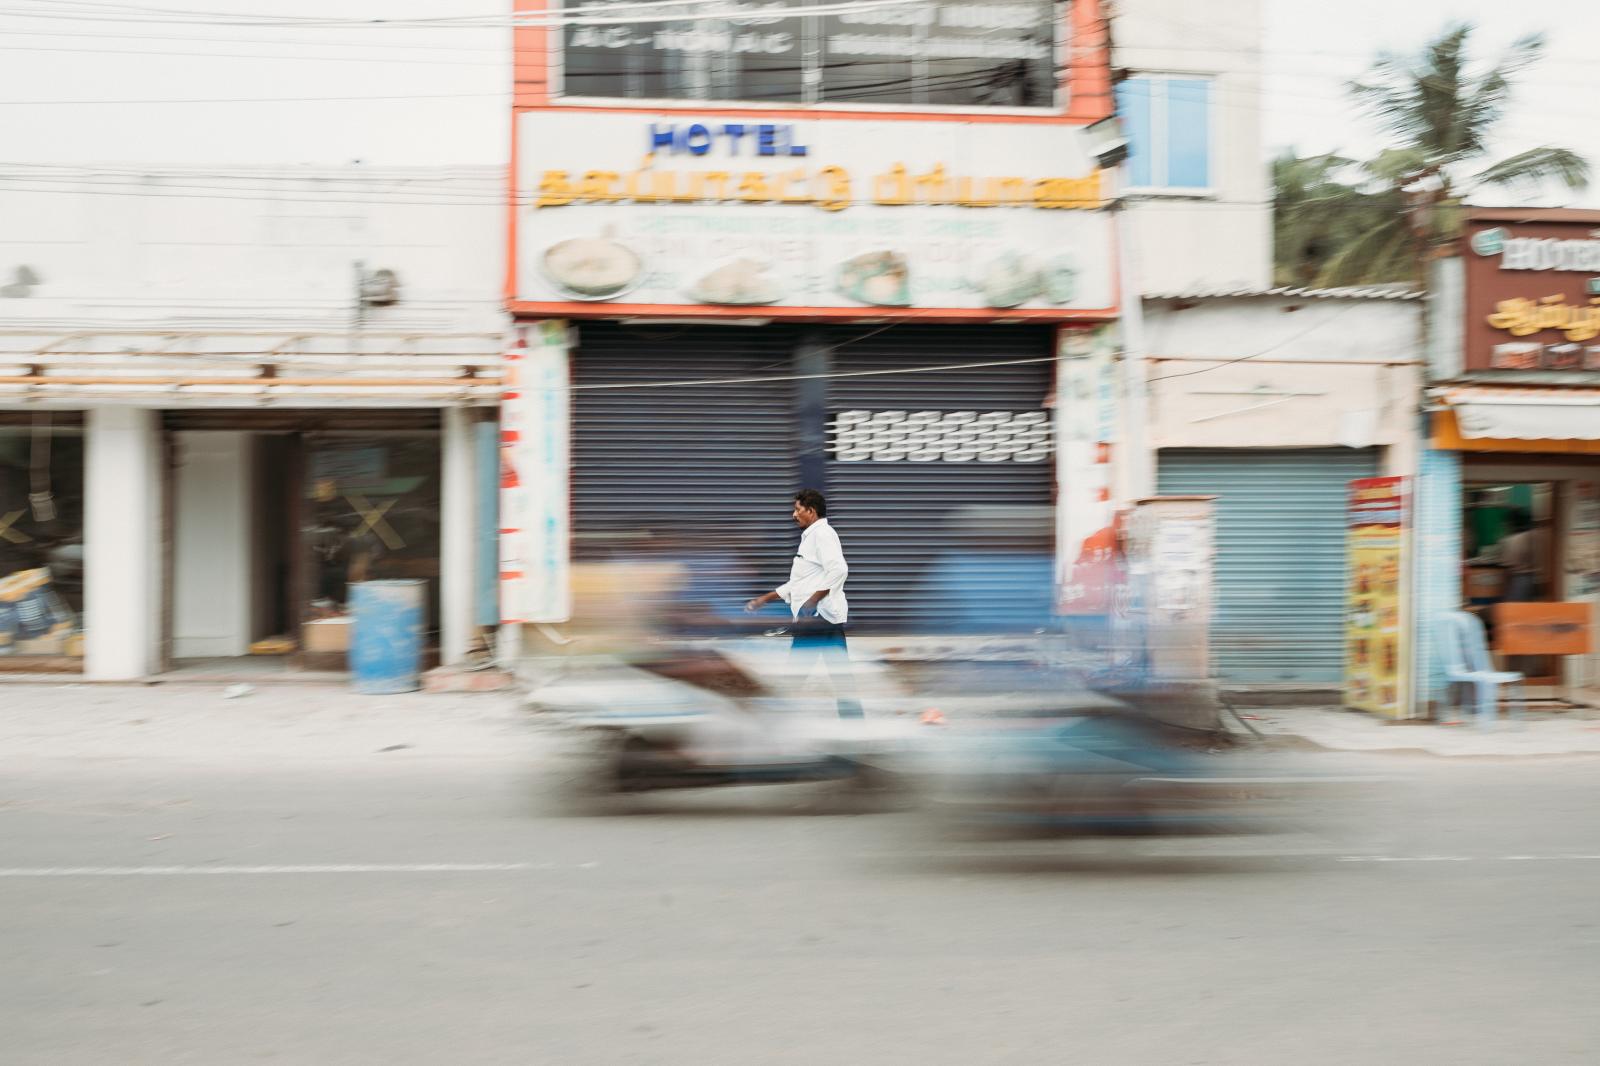 Streets of Chennai, India  | Buy this image